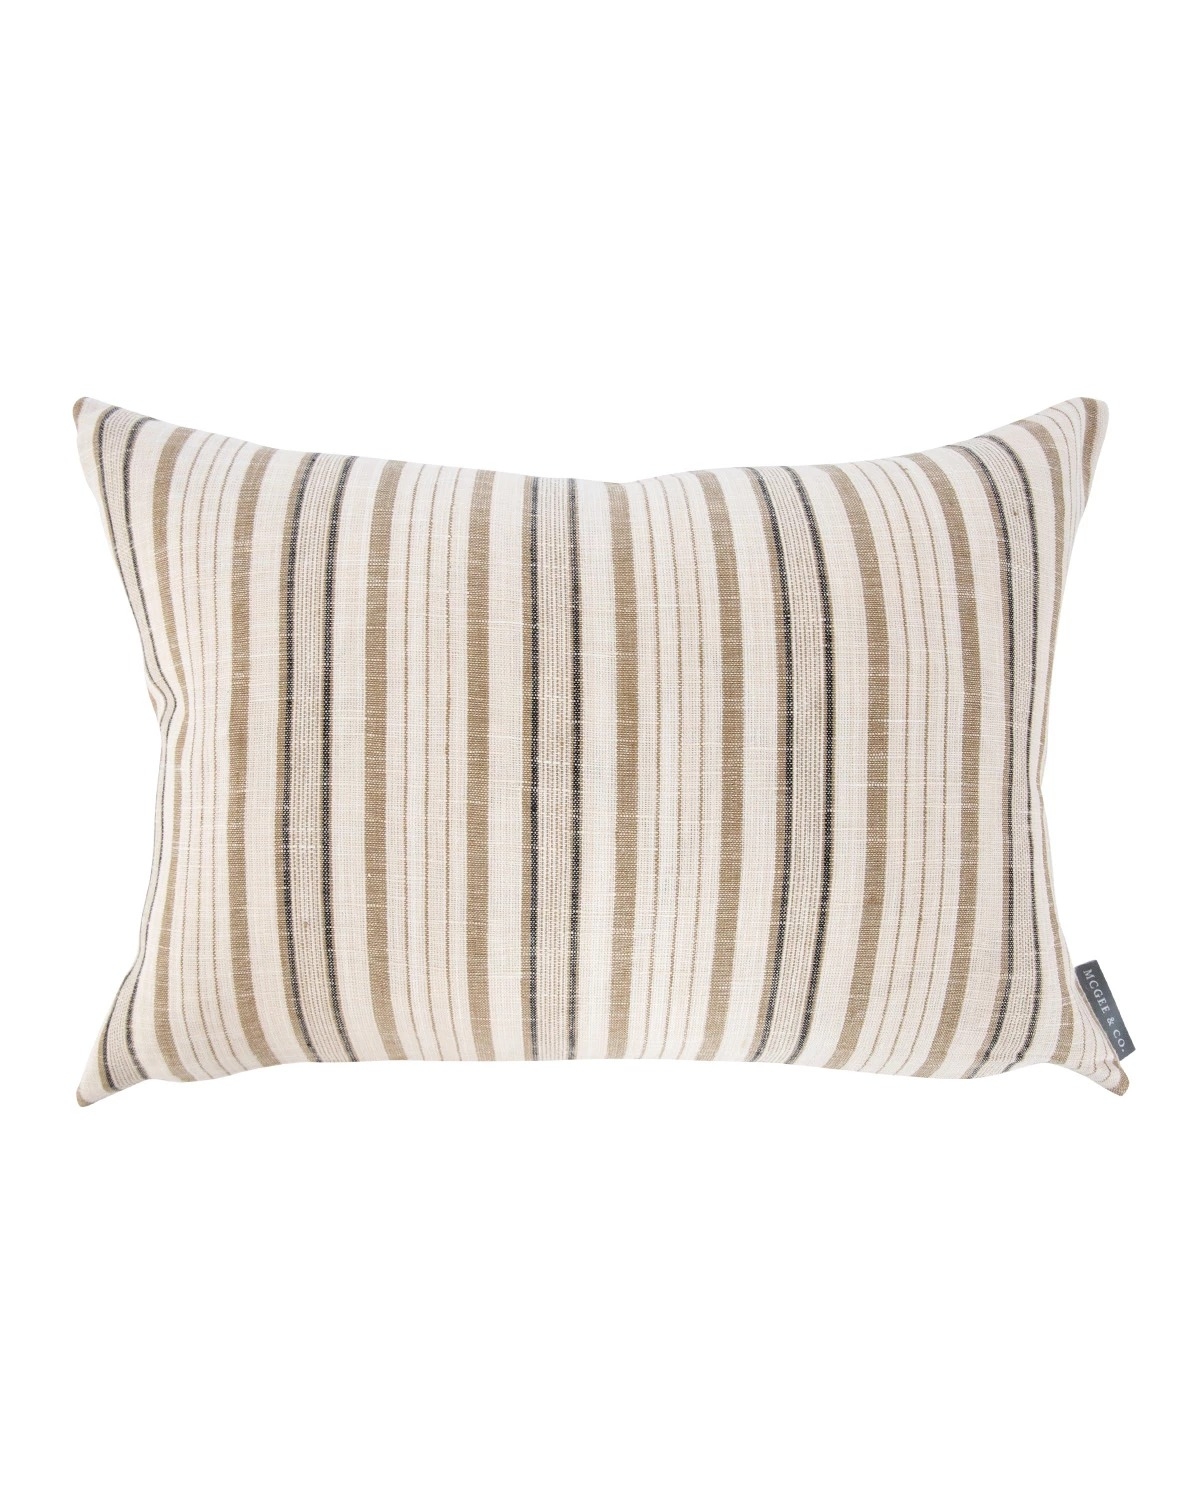 ARCHIE PILLOW WITHOUT INSERT, CAMEL, 14" x 20" - Image 0